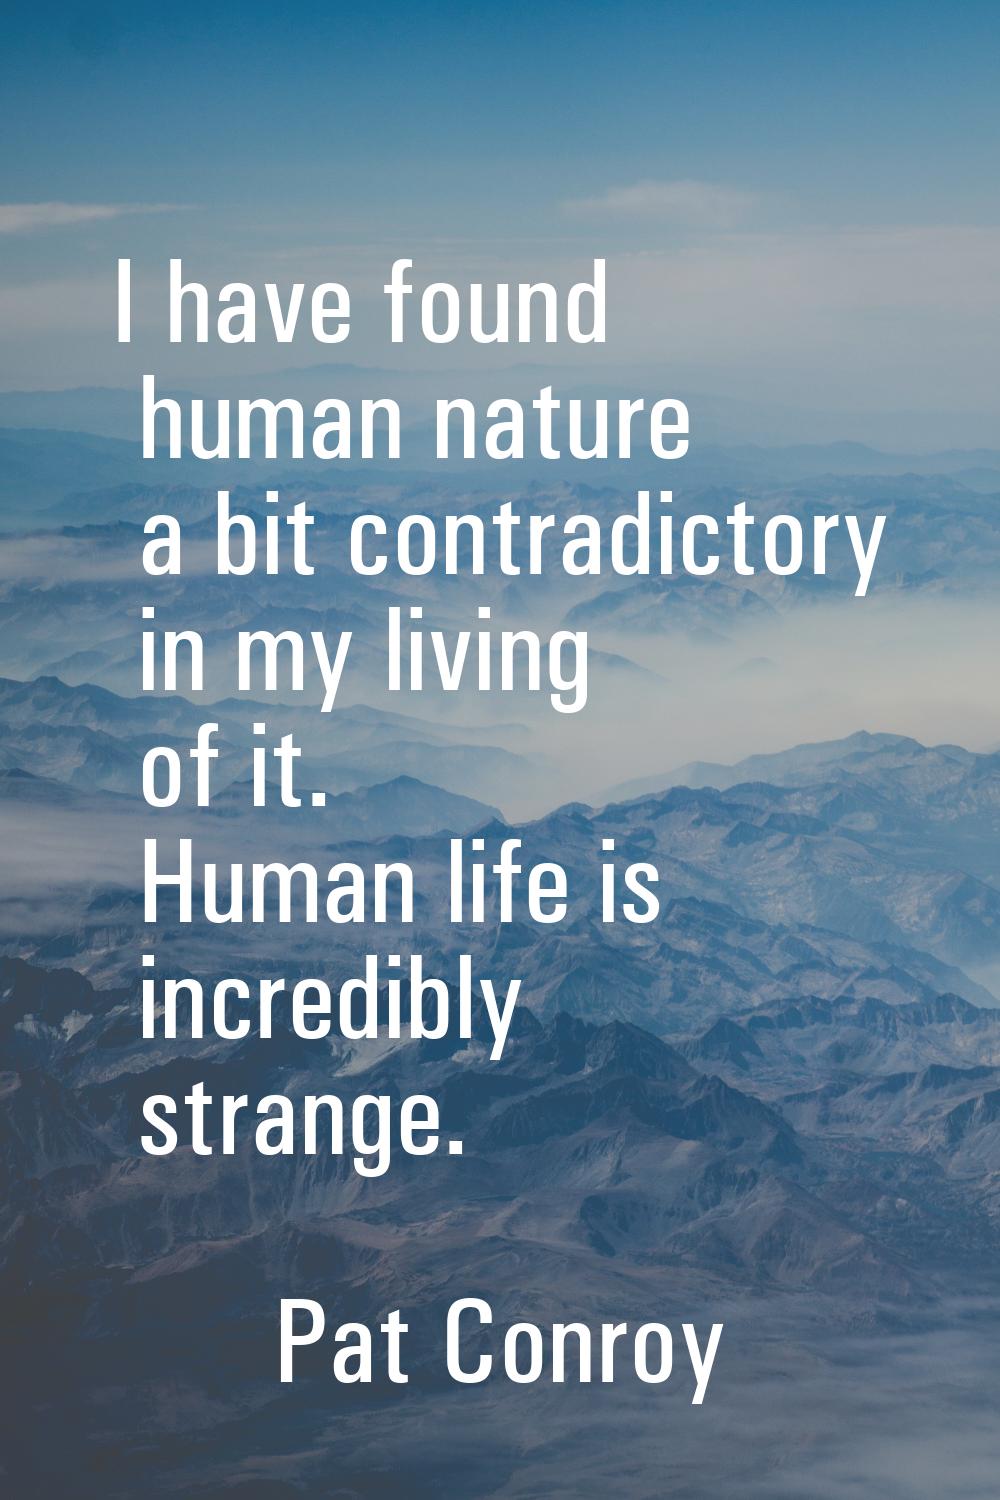 I have found human nature a bit contradictory in my living of it. Human life is incredibly strange.